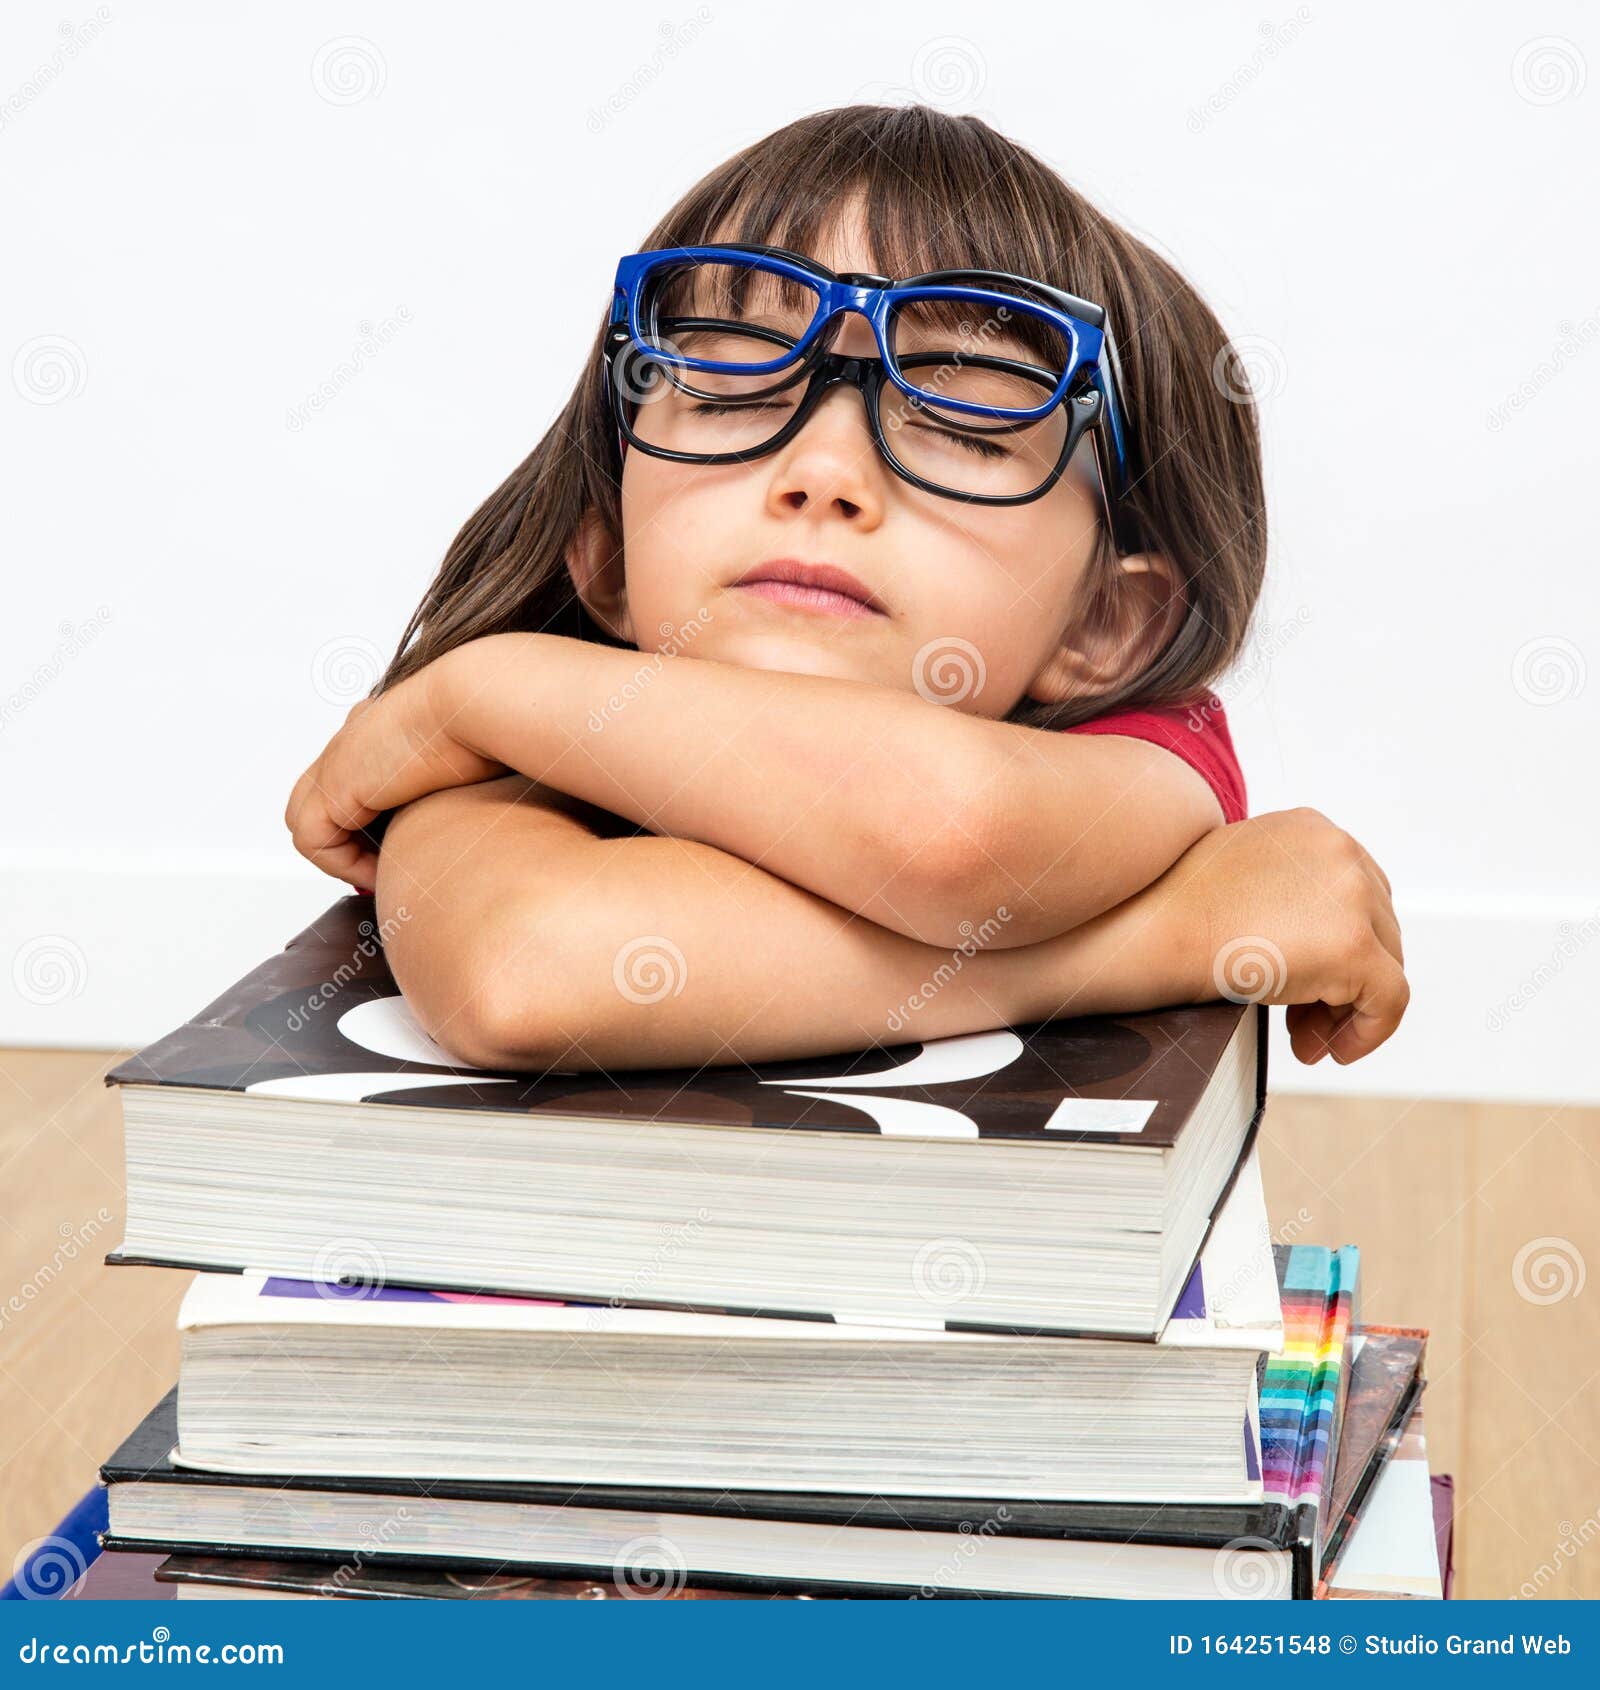 concept of happy gifted child with eyeglasses sleeping, white background